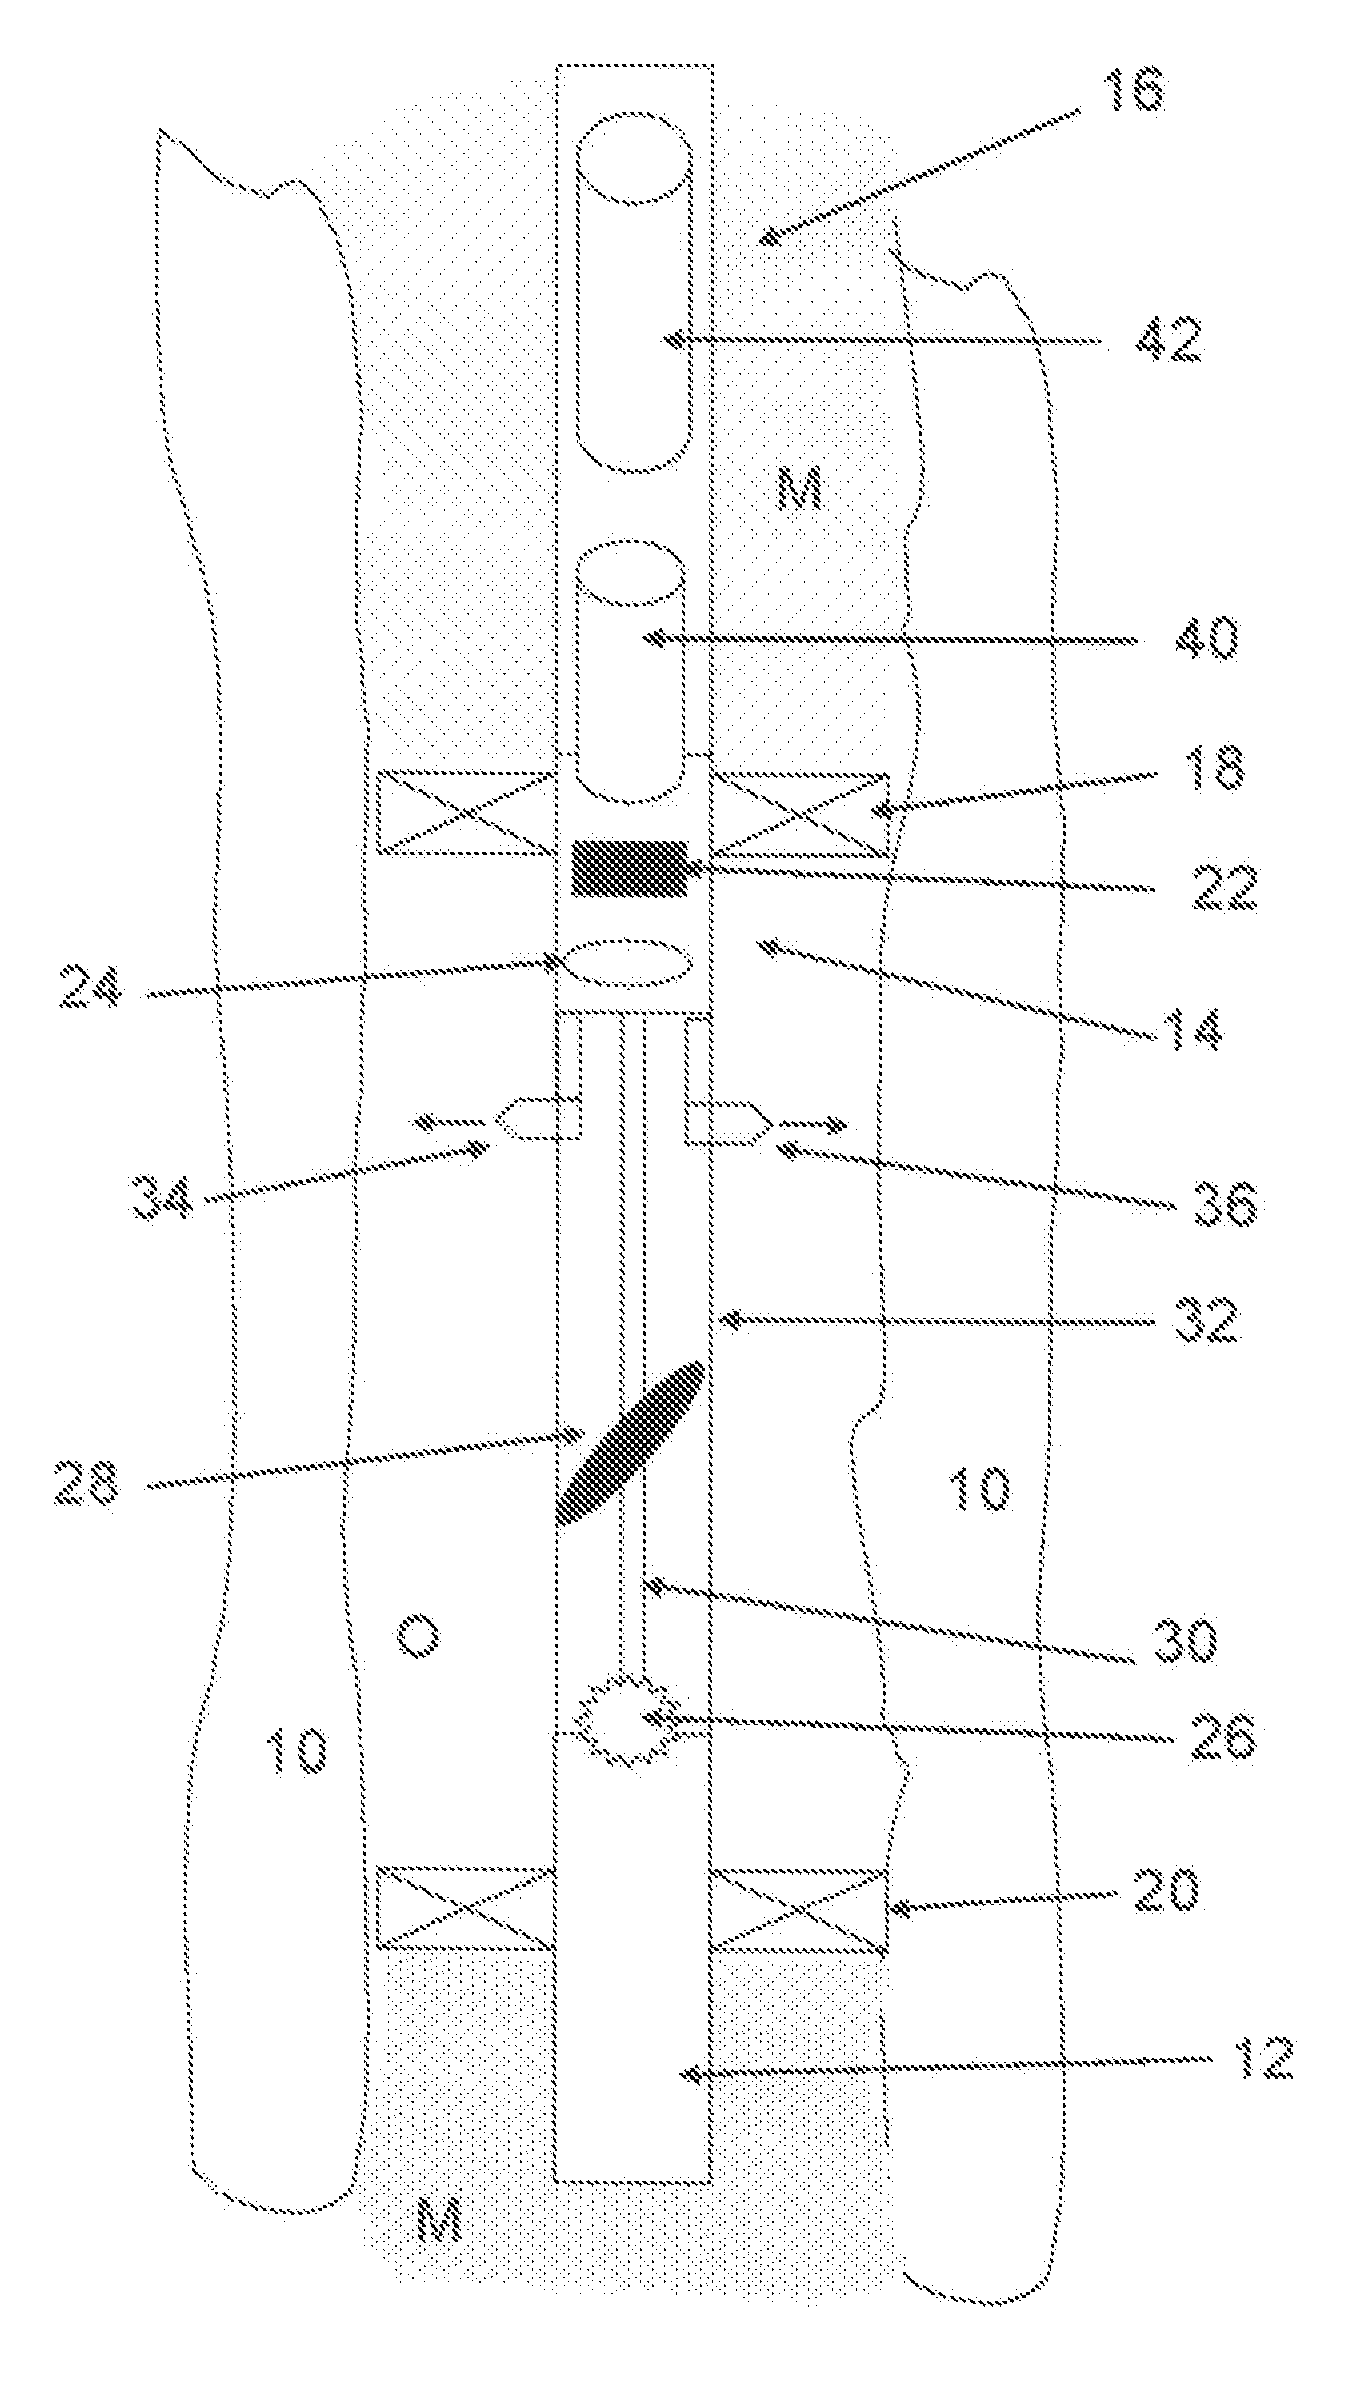 Apparatus and Method for Obtaining Images of a Borehole